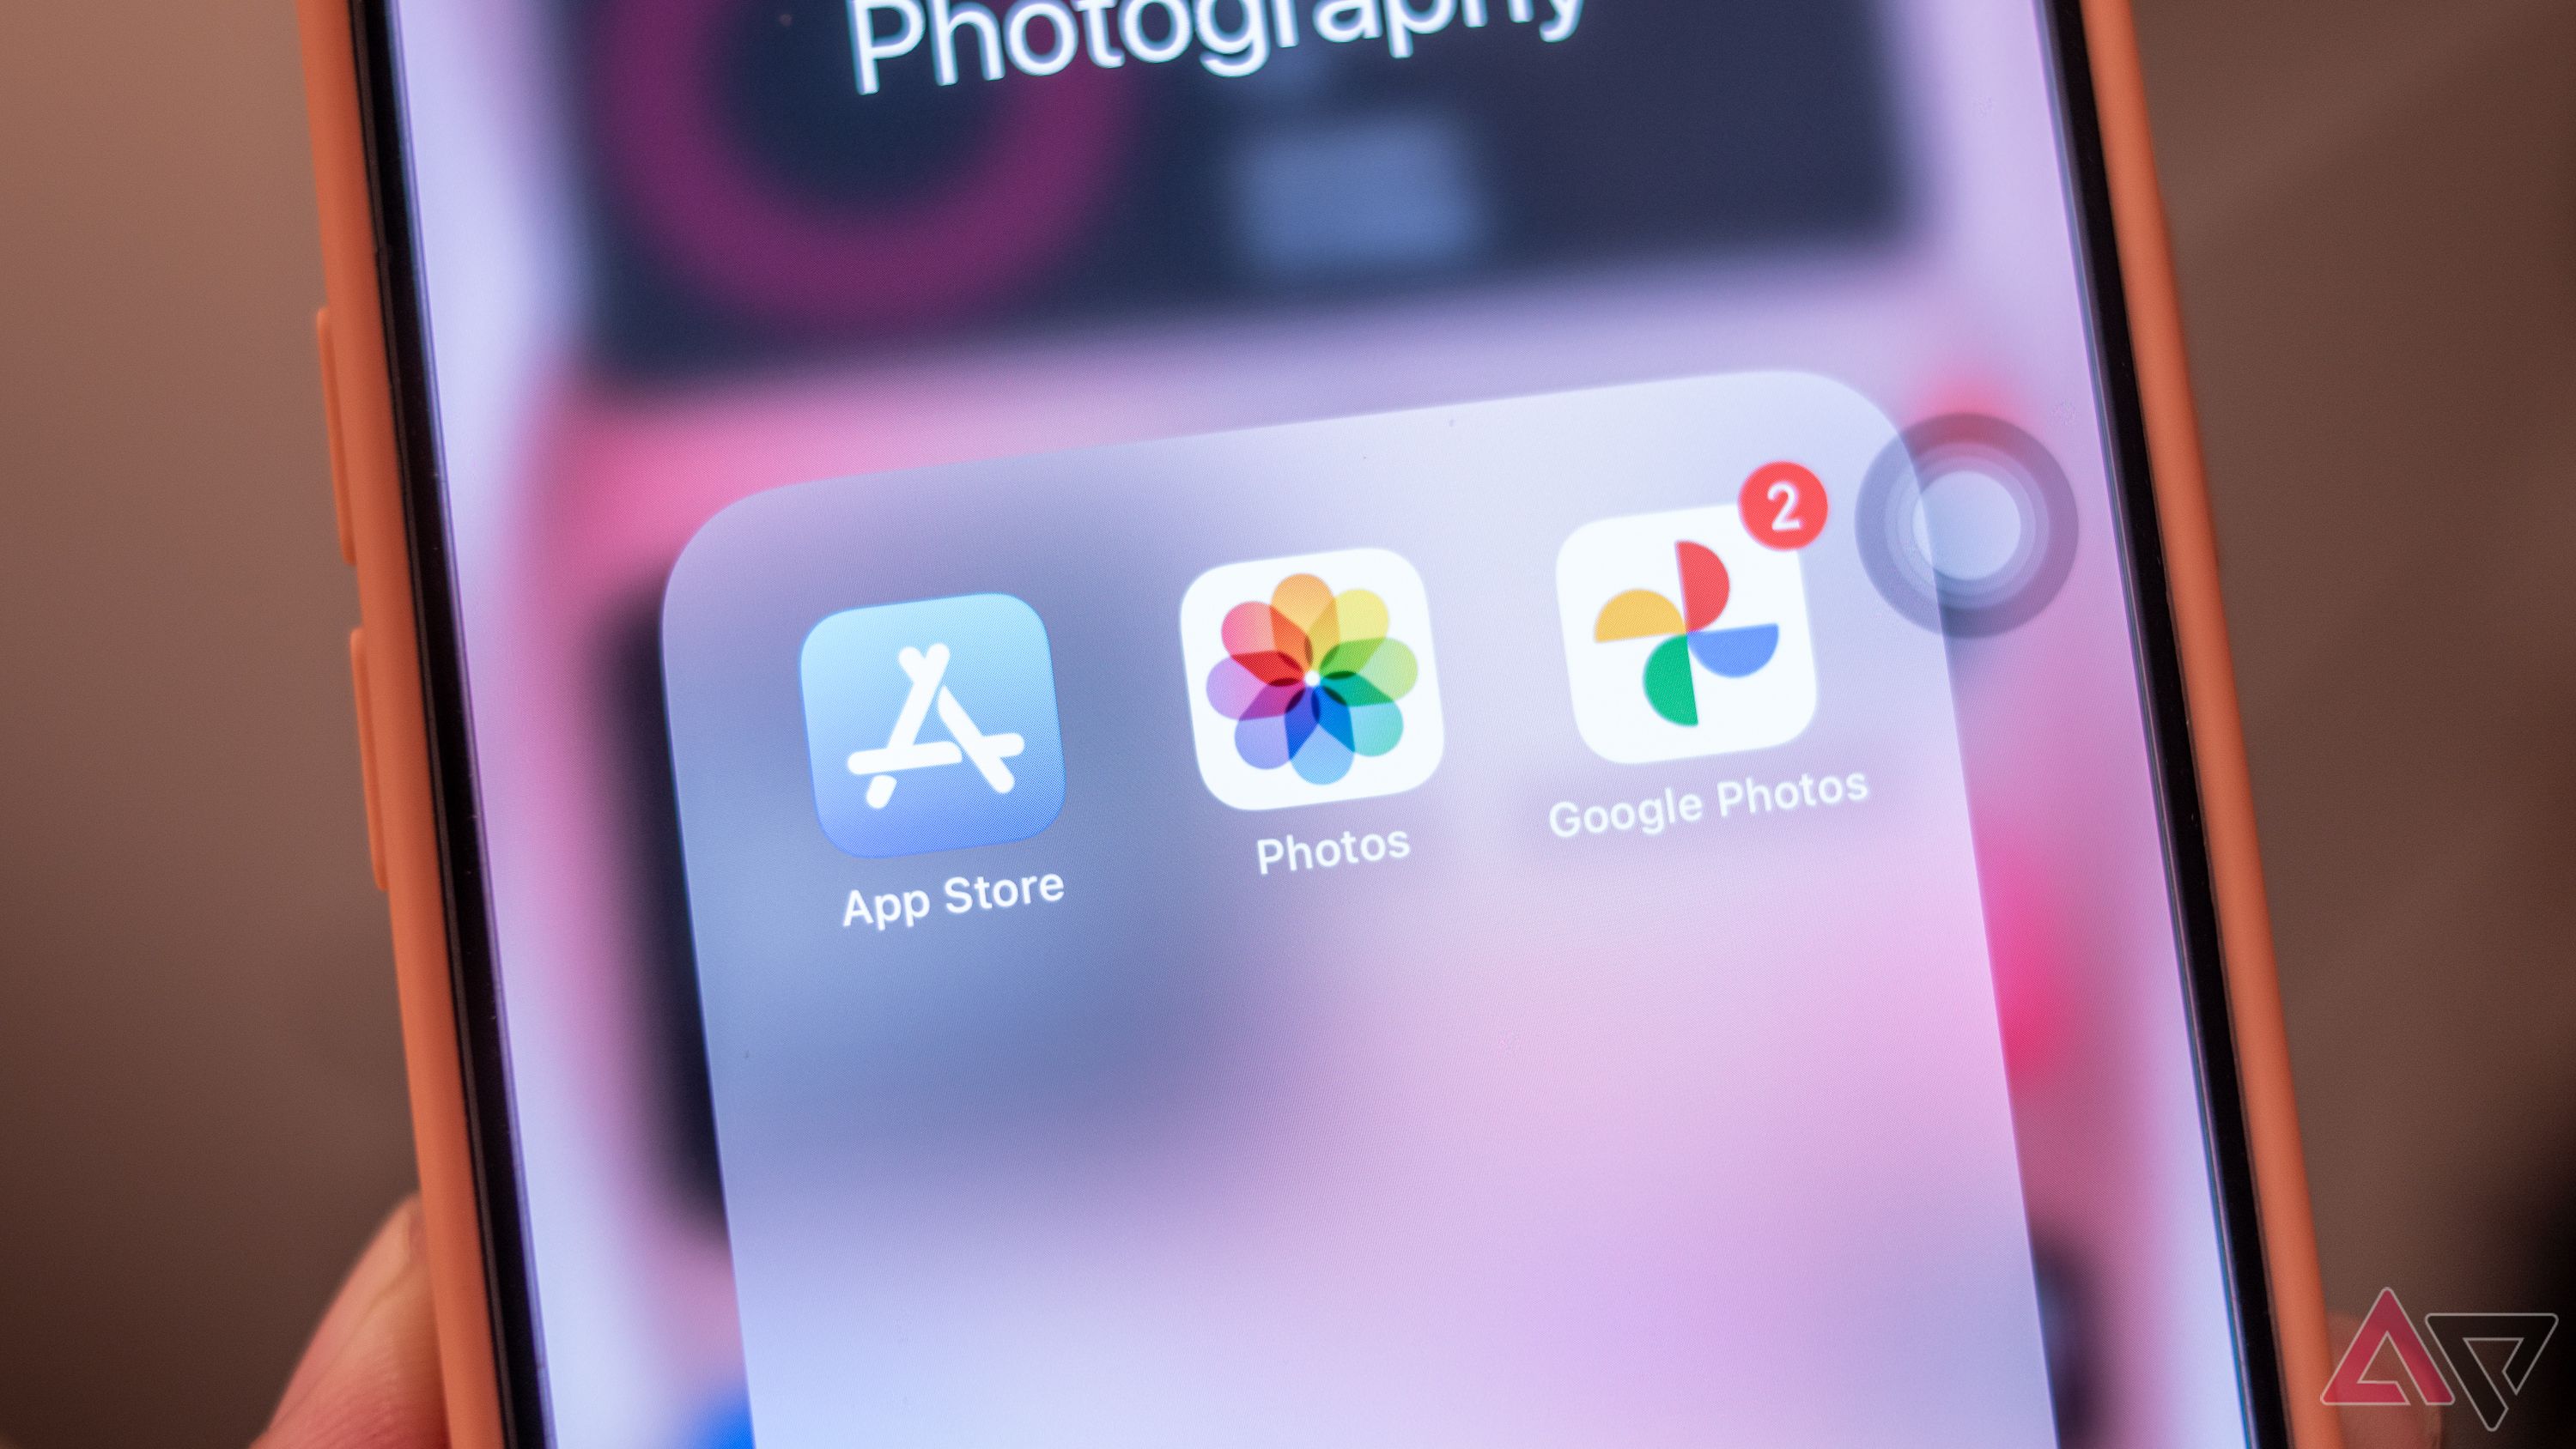 Apple Photos and Google Photos apps side by side